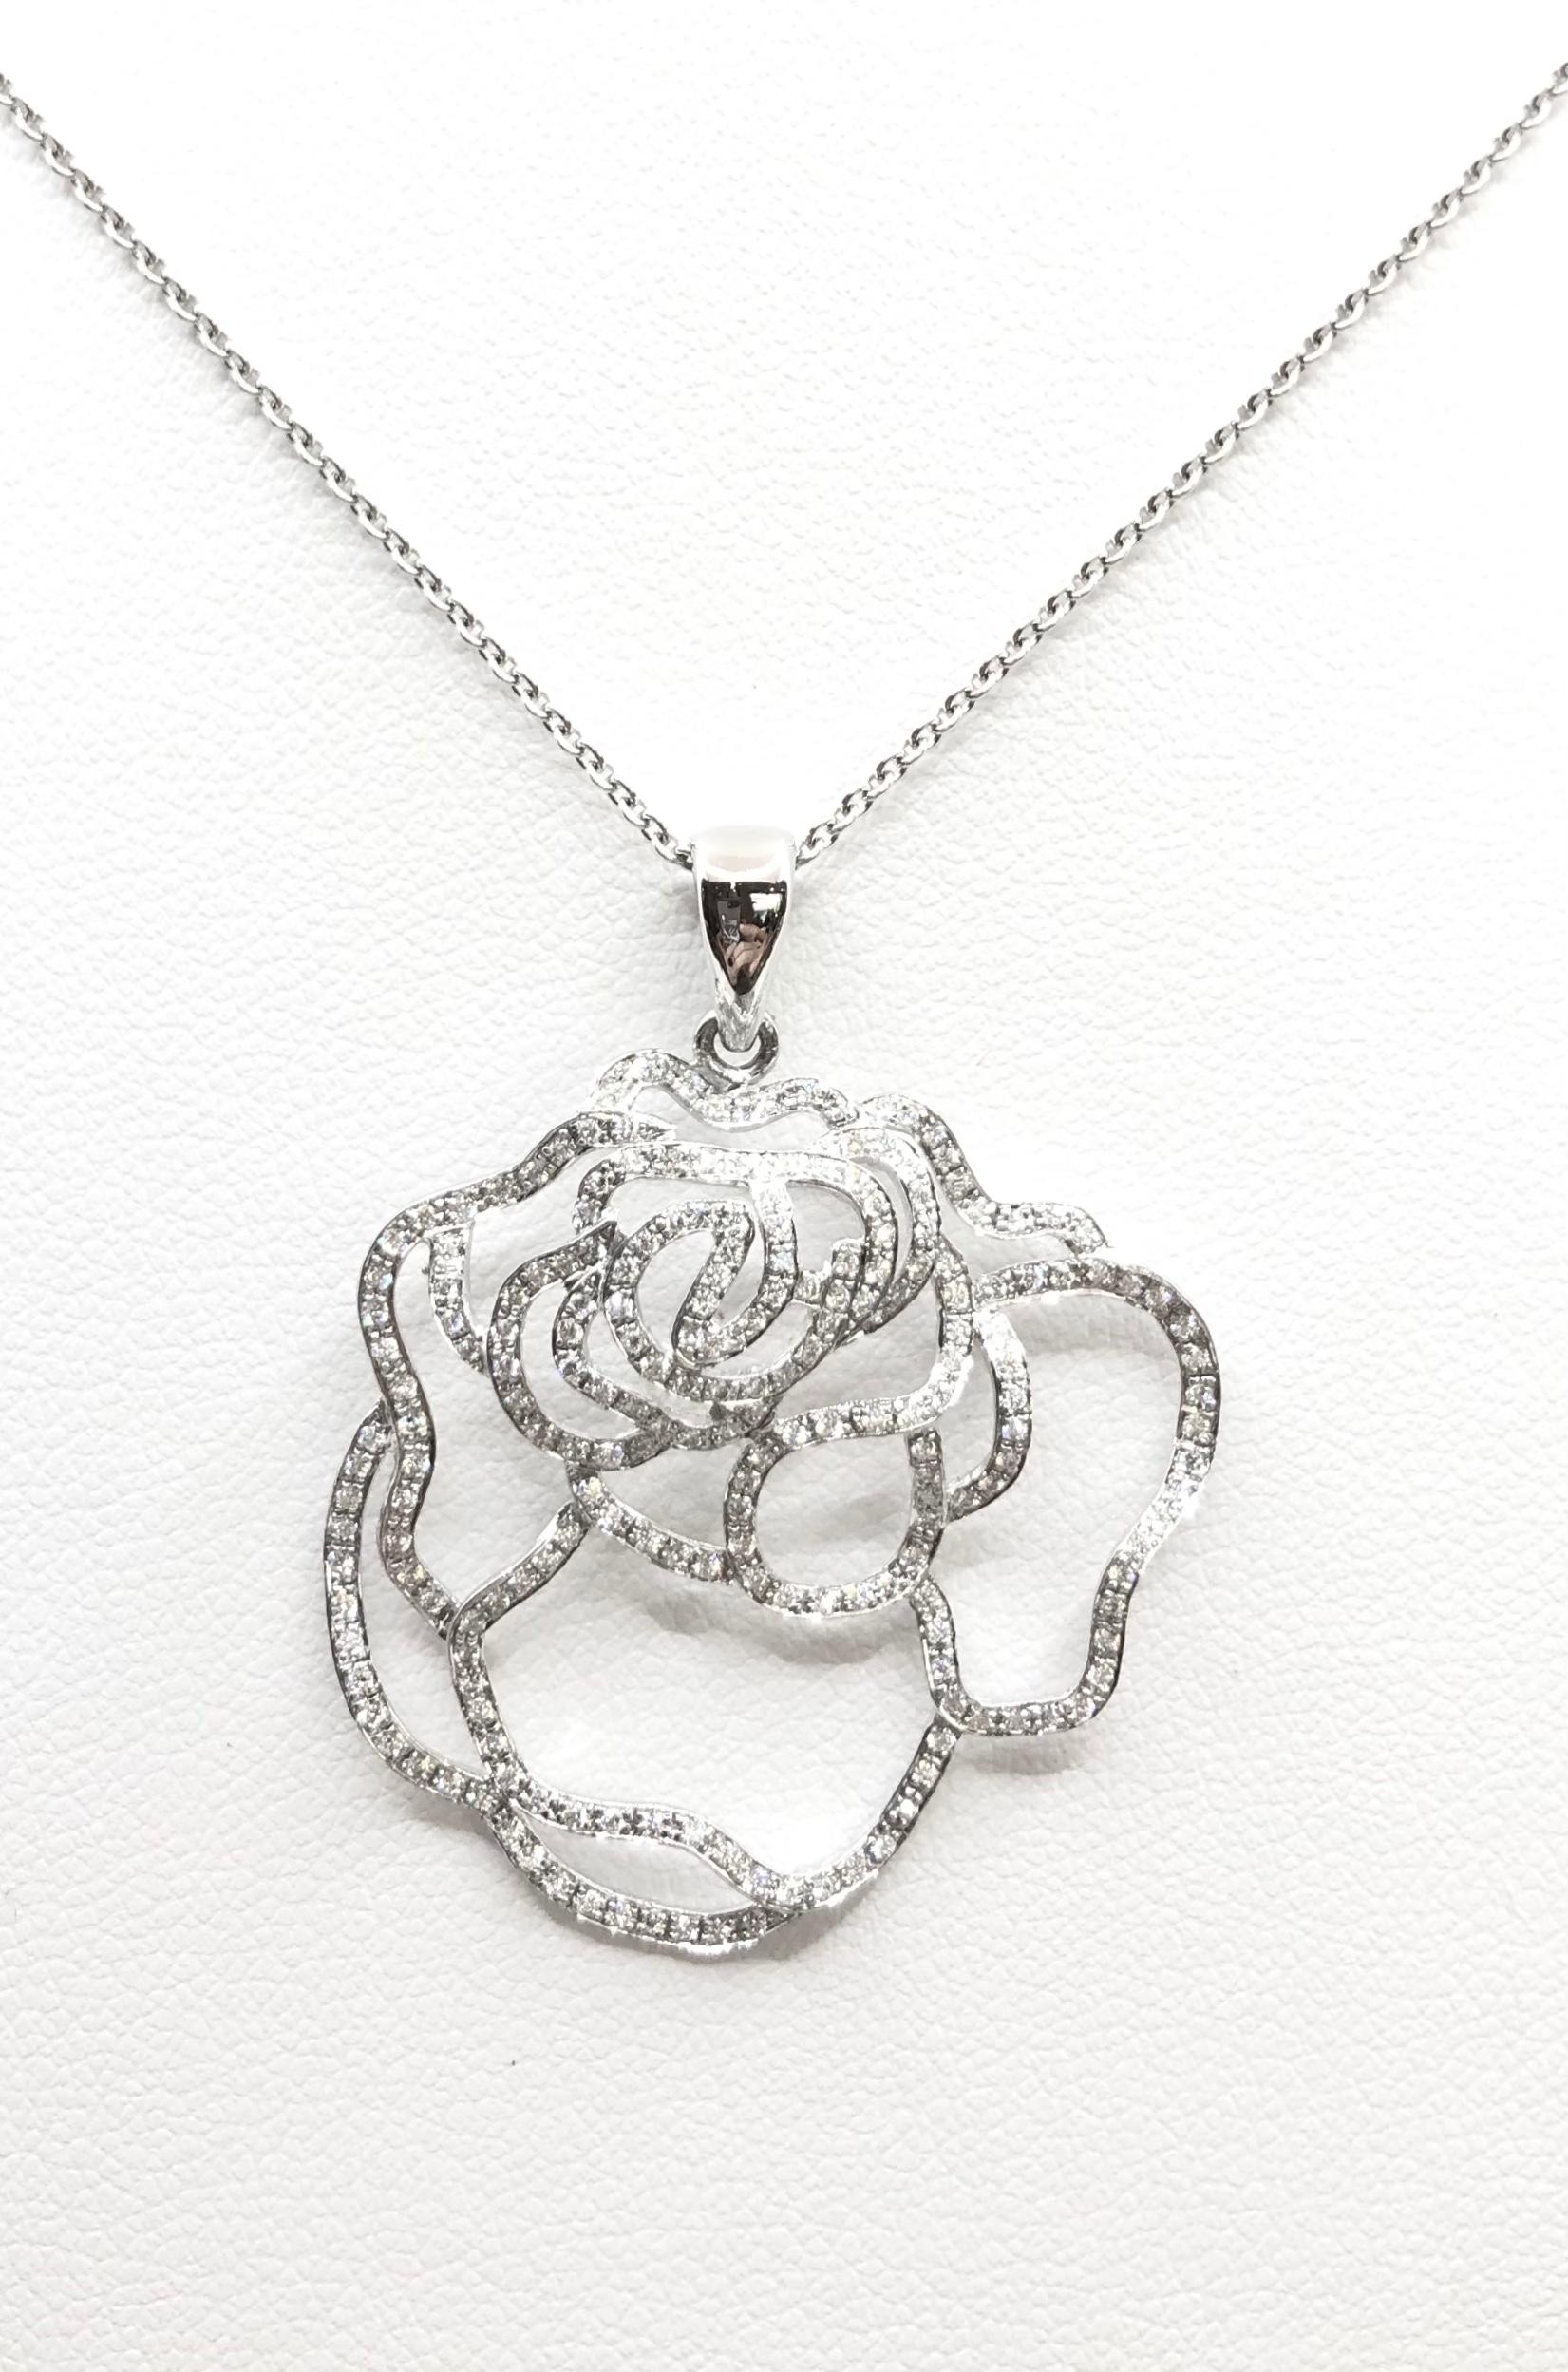 Diamond 0.56 carat Pendant set in 18 Karat White Gold Settings
(chain not included)

Width: 3.2 cm 
Length: 3.9 cm
Total Weight: 3.13 grams

